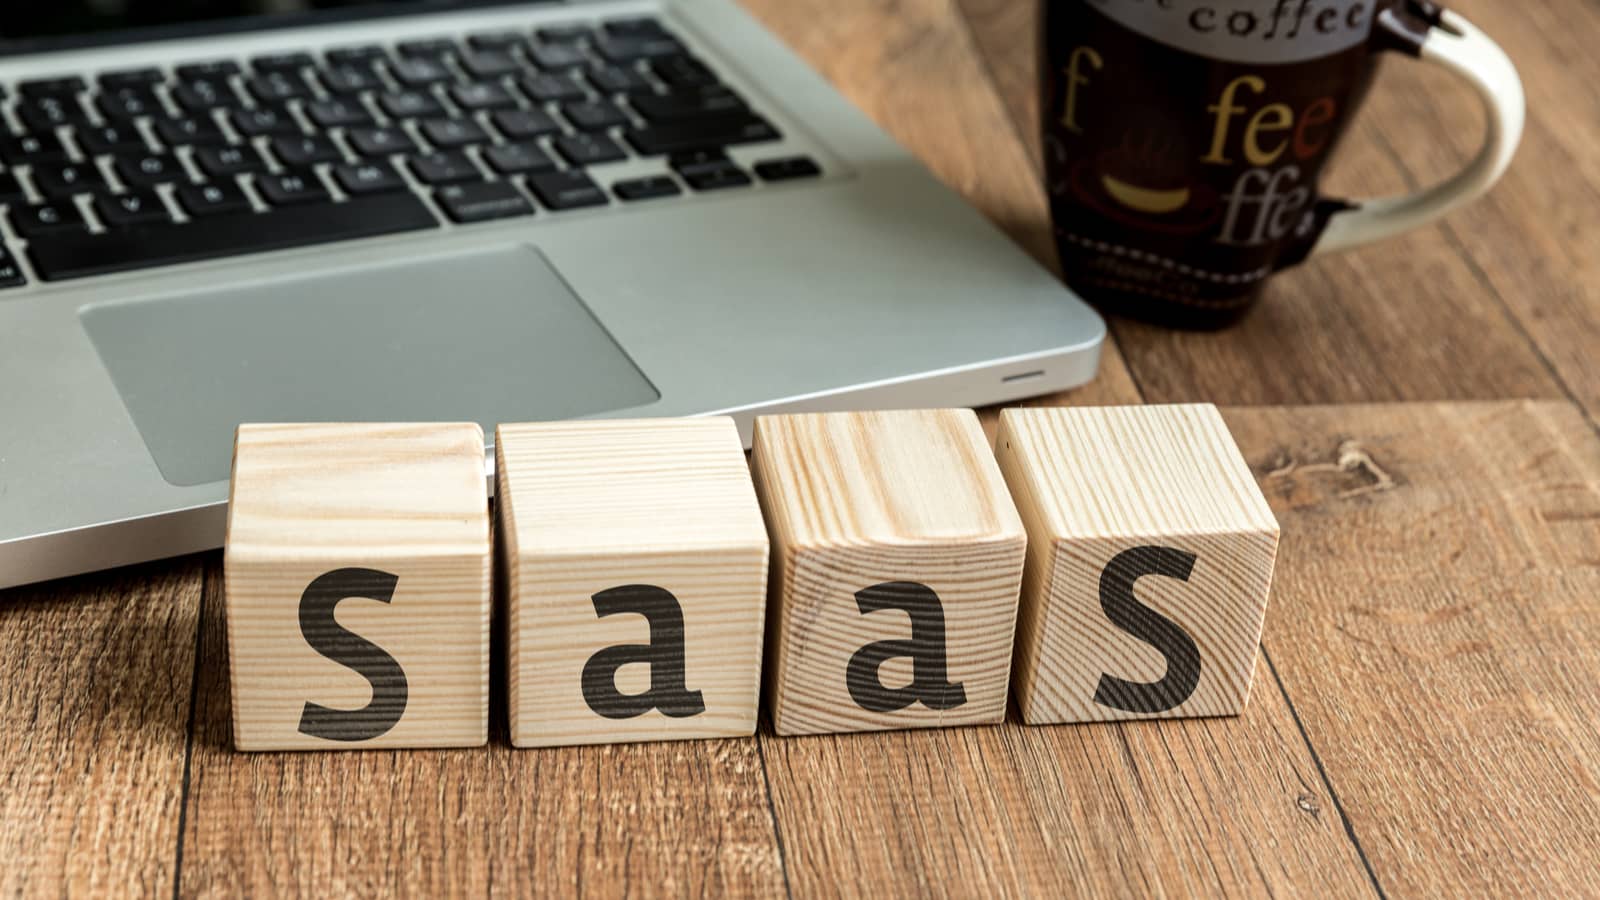 The SaaS Business Model: How it’s Different